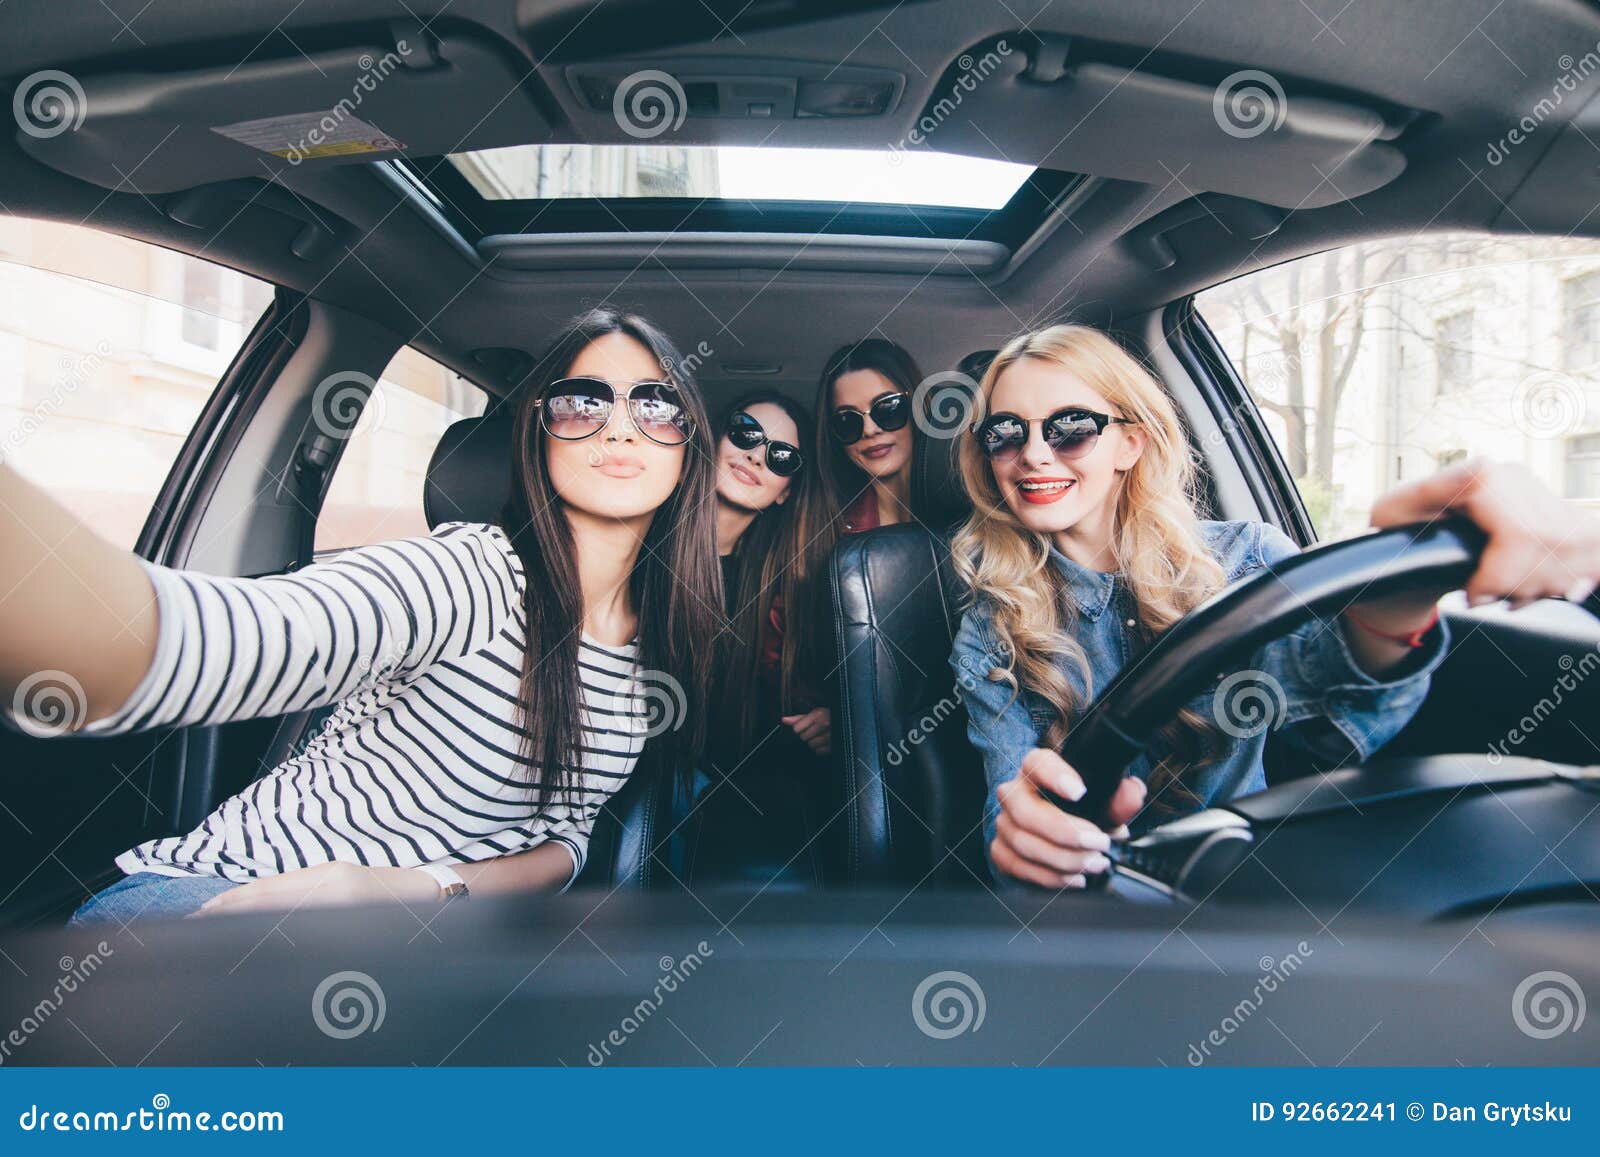 Group Of Girls Having Fun In The Car And Taking Selfies